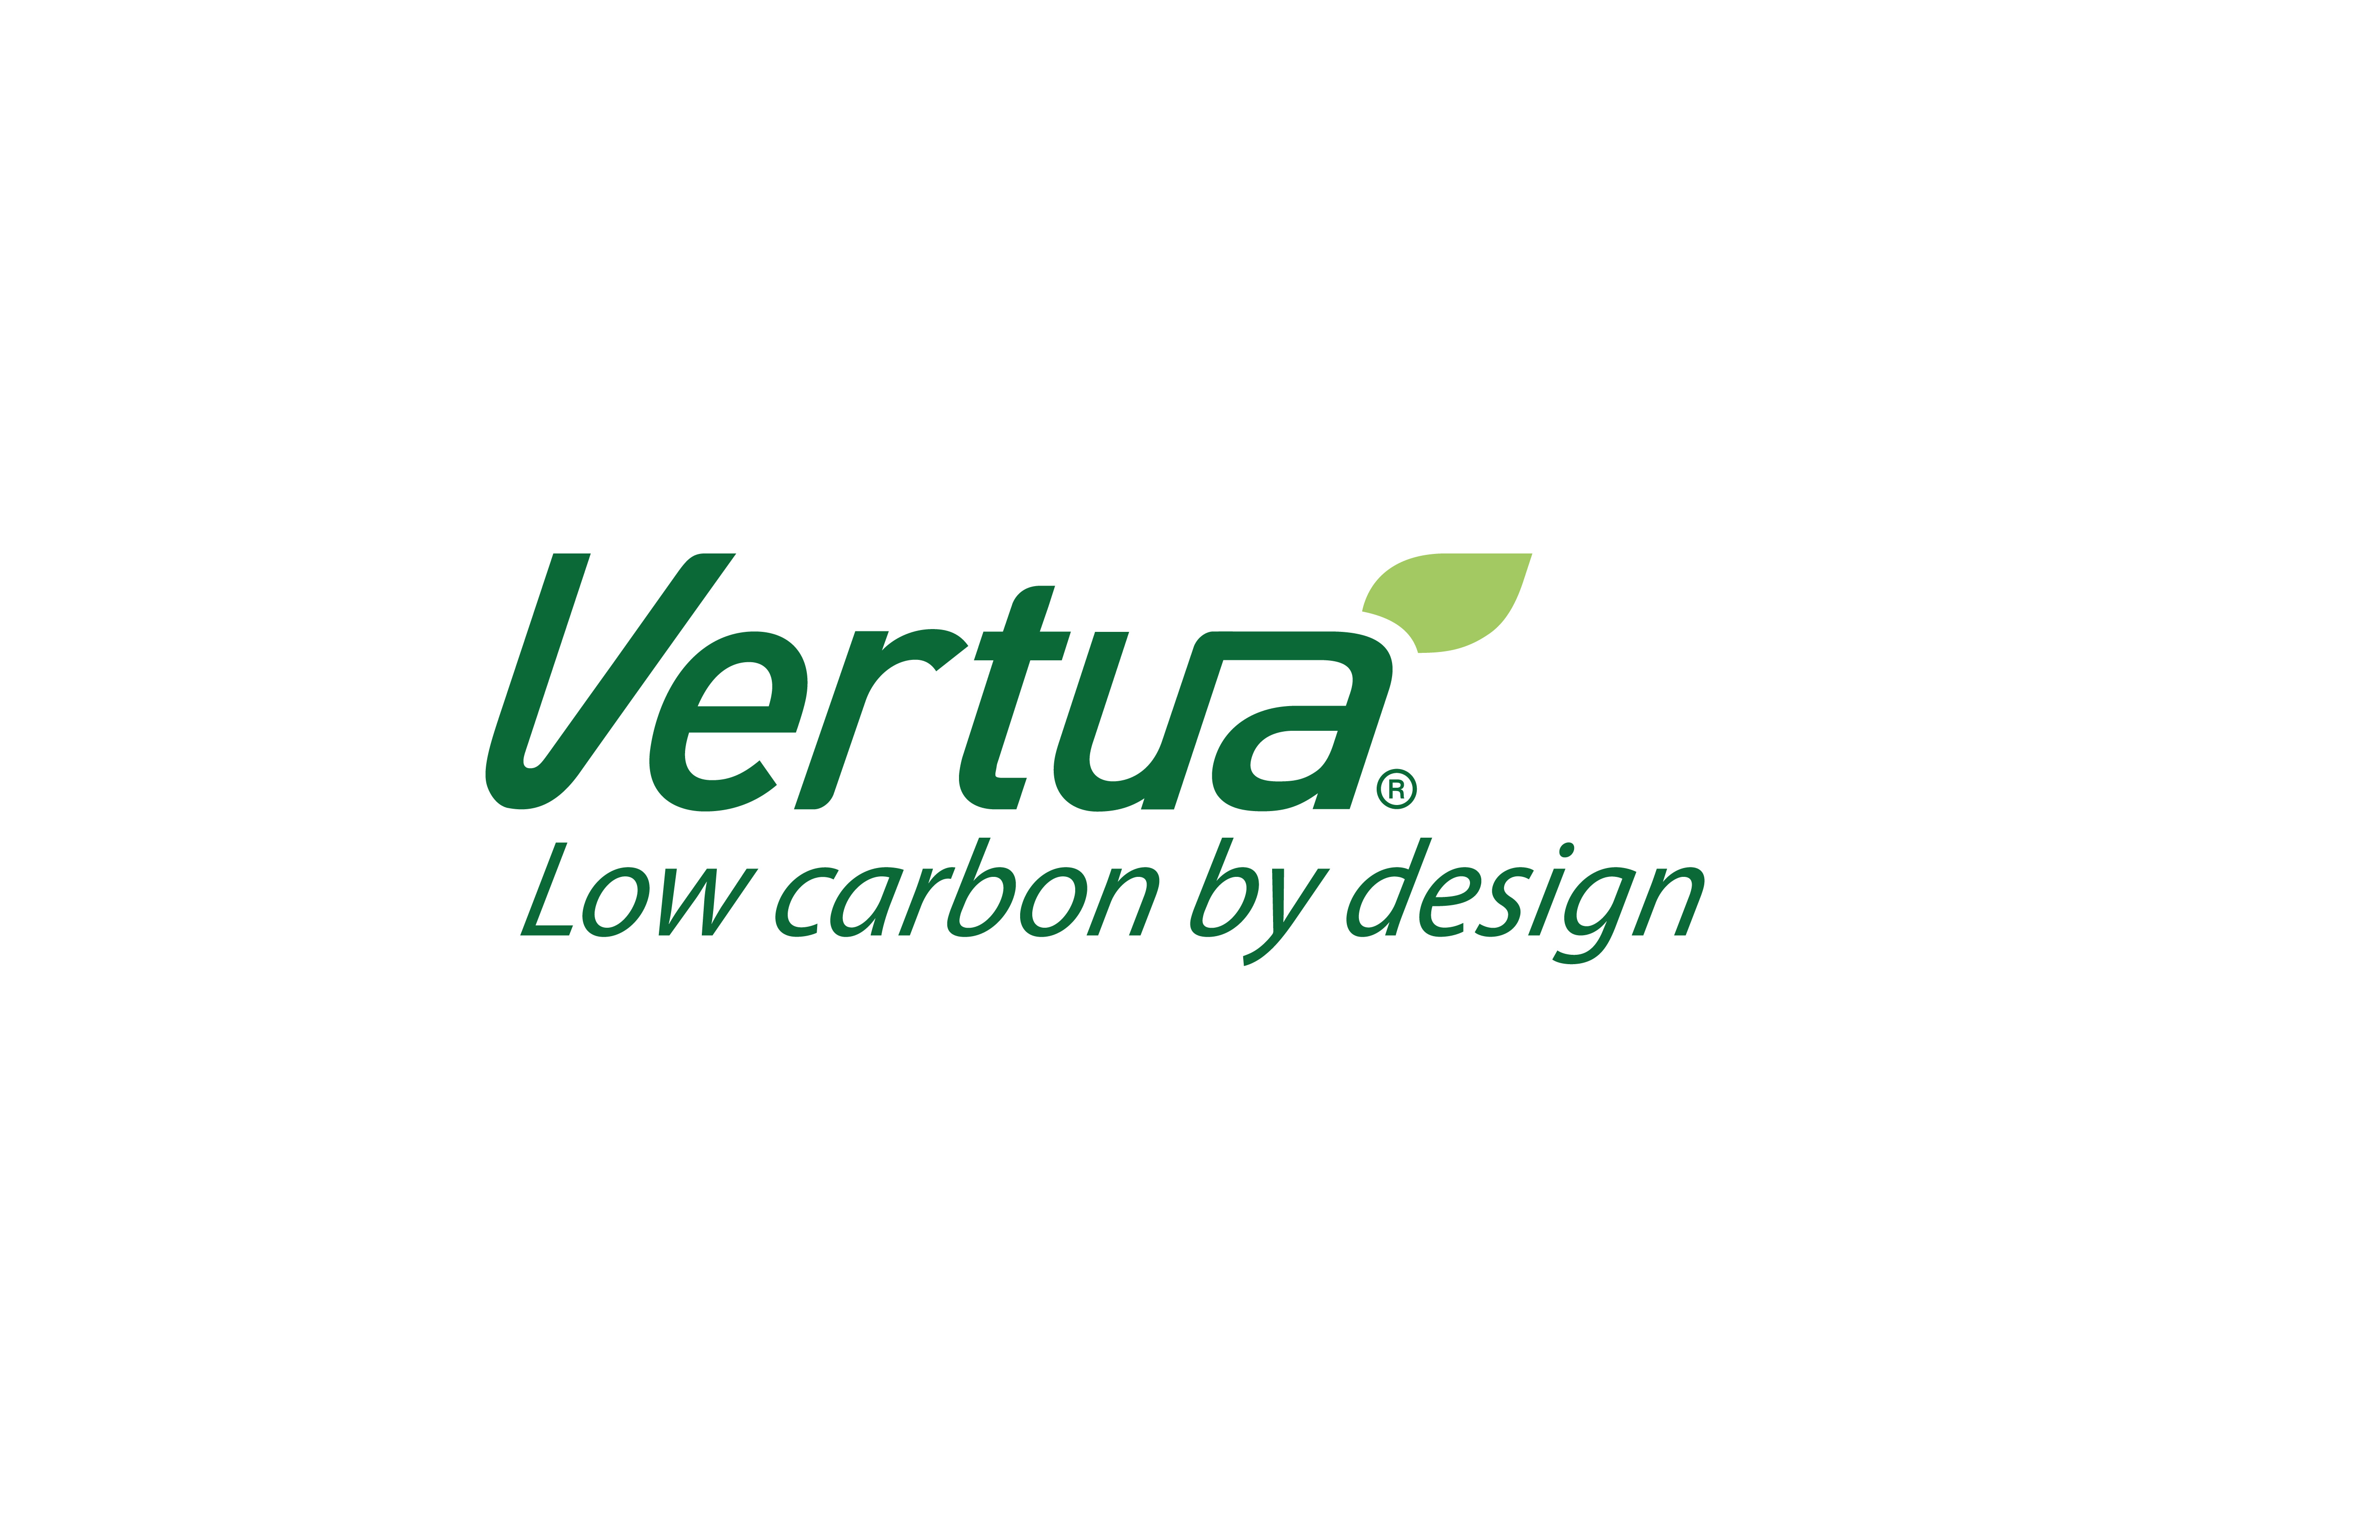 The Vertua low carbon range was first launched in France in 2018